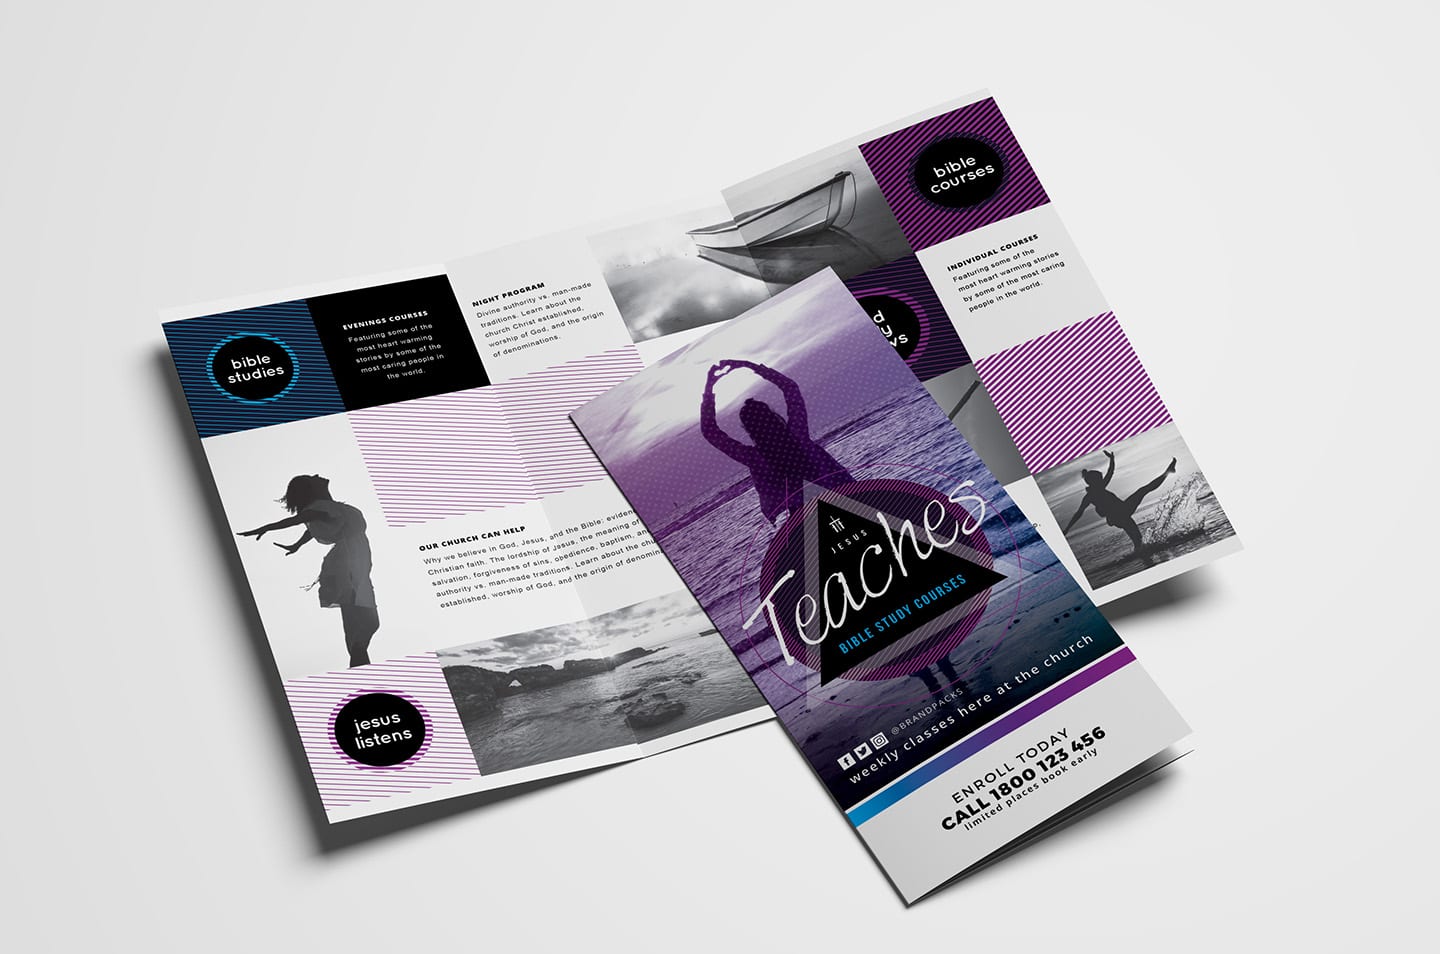 Free Church Templates - Photoshop PSD & Illustrator Ai - BrandPacks In Free Church Flyer Templates Download